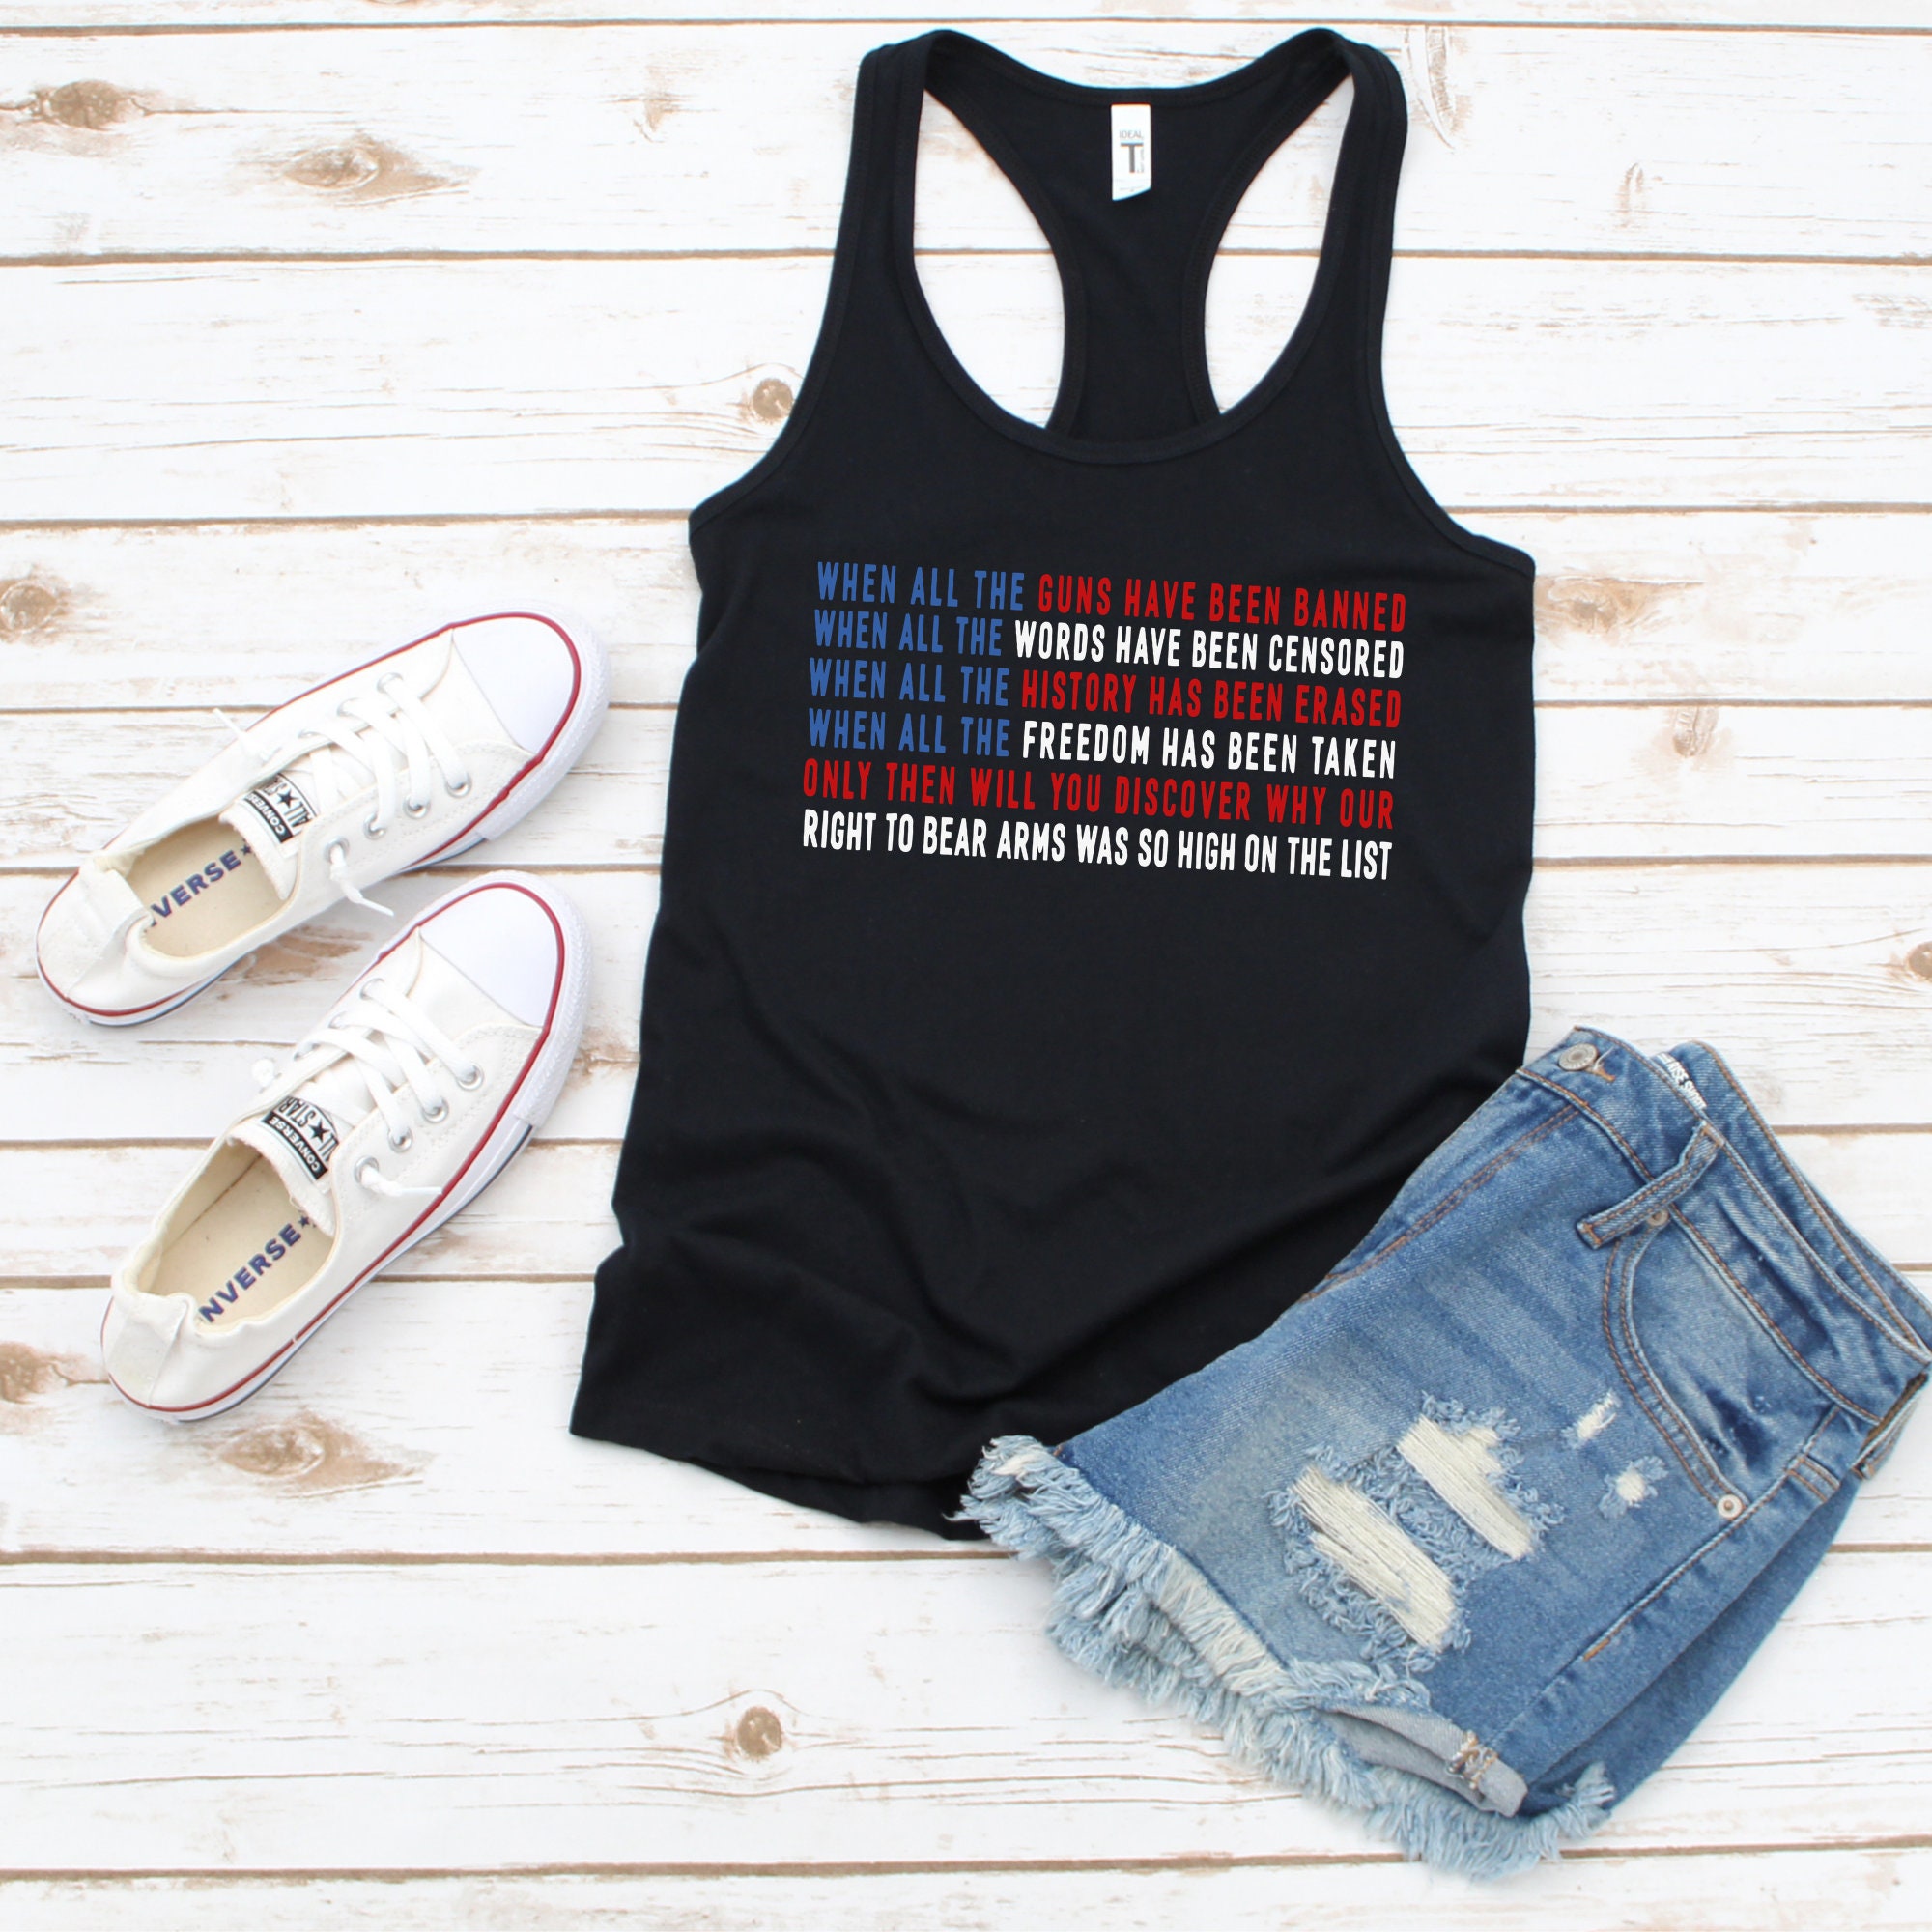 Discover We the people 1776 Tank Top